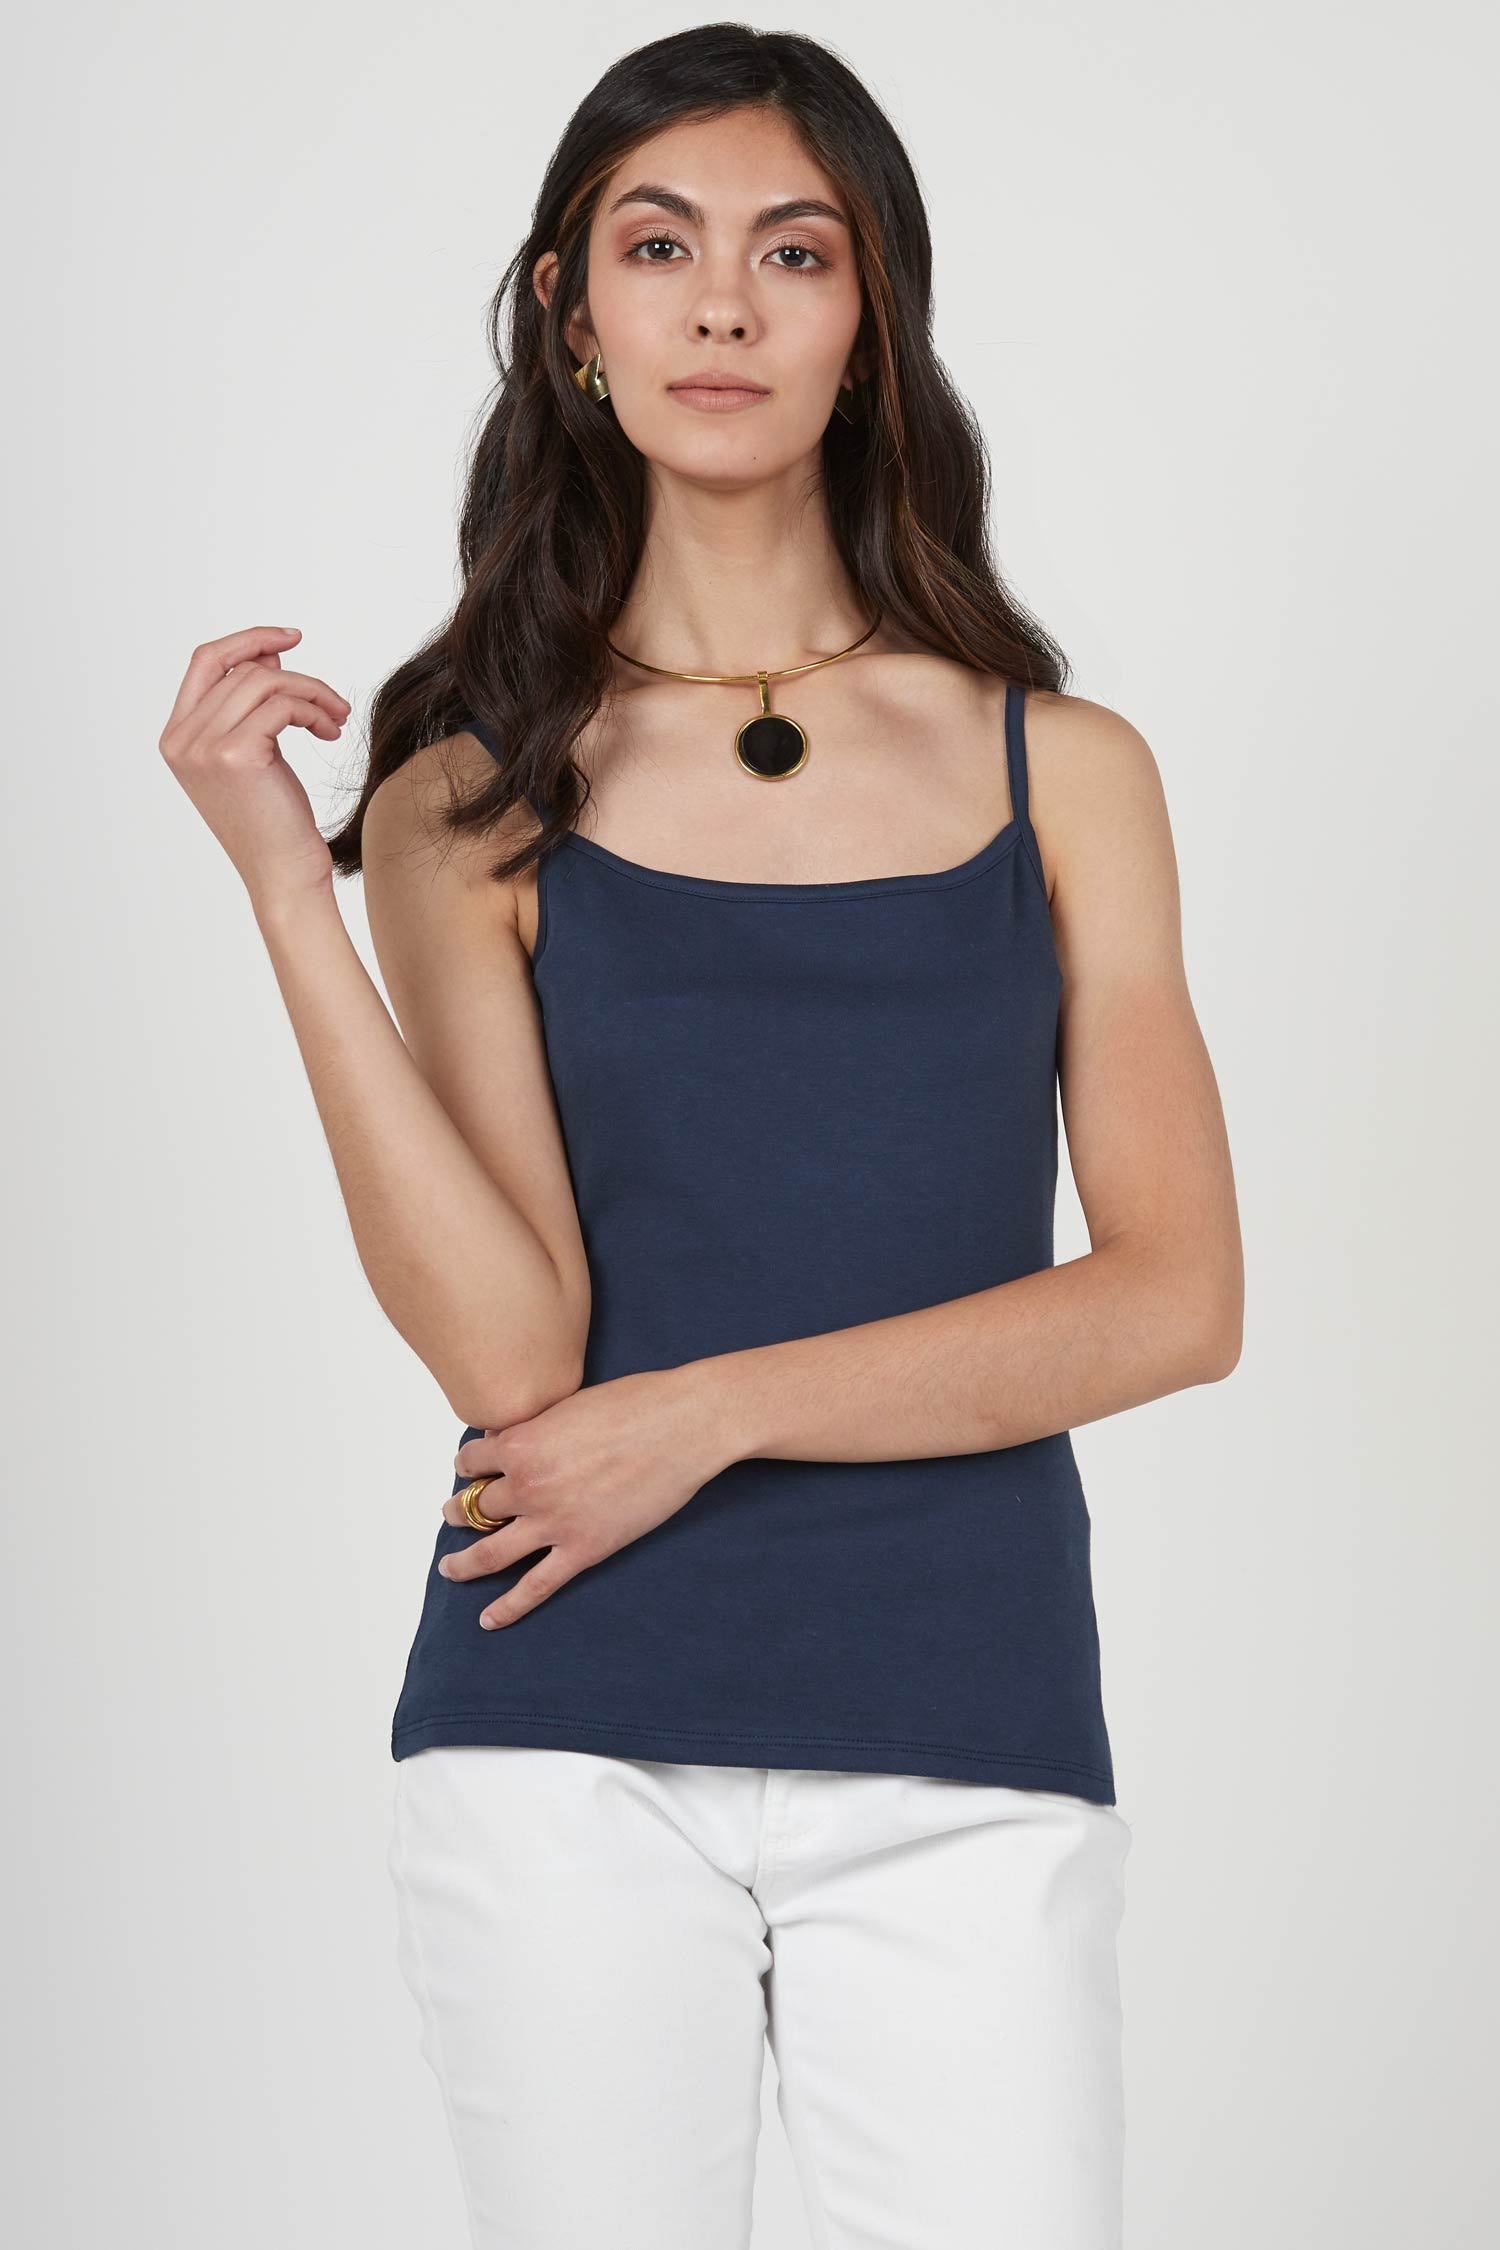 Cottonique Women's Hypoallergenic Camisole Made from 100% Organic